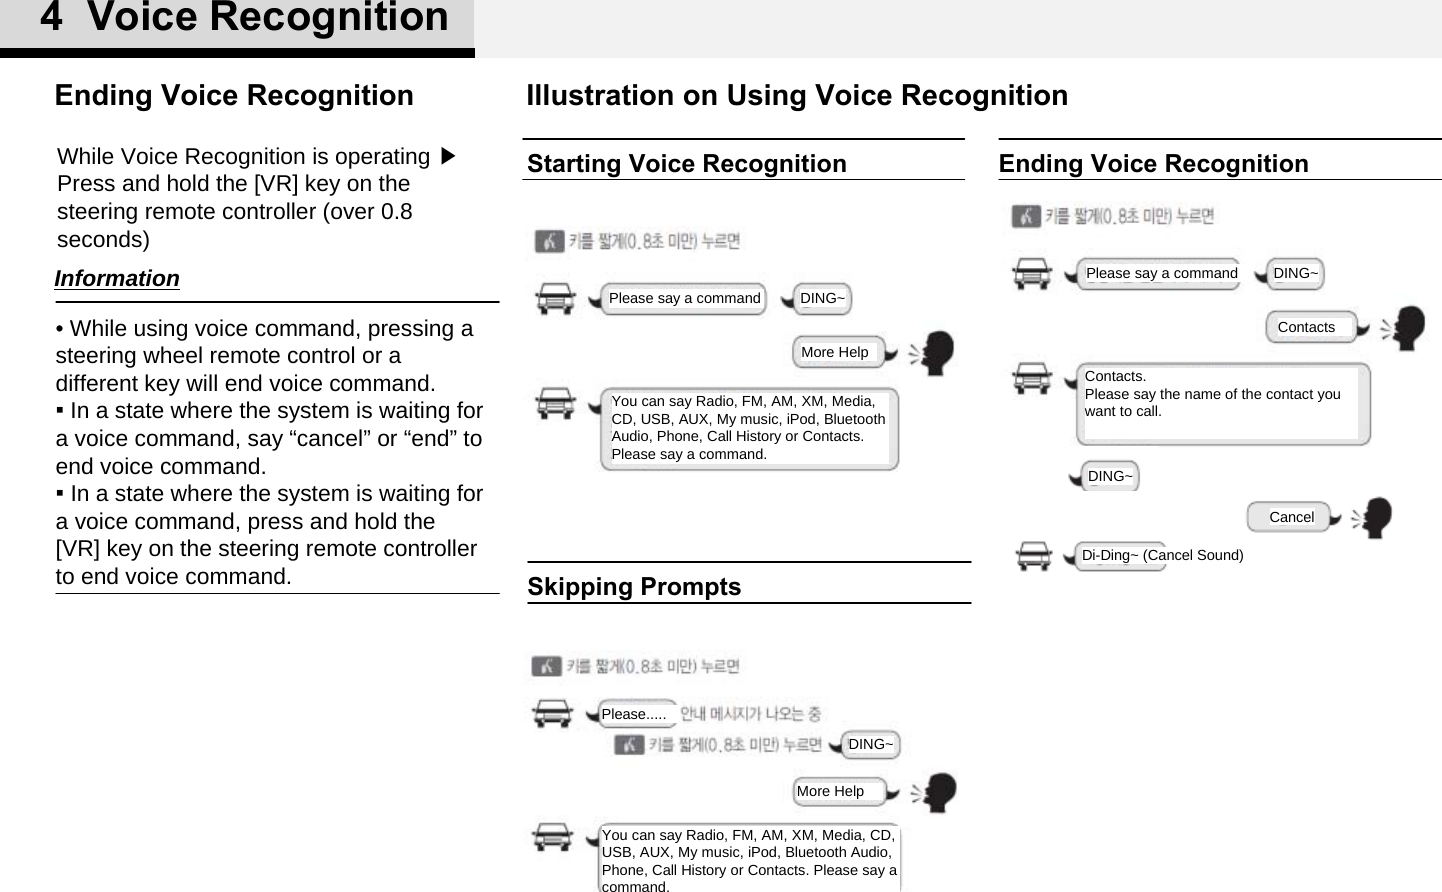 Illustration on Using Voice RecognitionStarting Voice RecognitionPlease say a command DING~More HelpYou can say Radio, FM, AM, XM, Media, CD, USB, AUX, My music, iPod, Bluetooth Audio, Phone, Call History or Contacts. Please say a command.Skipping PromptsPlease.....DING~More HelpYou can say Radio, FM, AM, XM, Media, CD, USB, AUX, My music, iPod, Bluetooth Audio, Phone, Call History or Contacts. Please say a command.4  Voice RecognitionEnding Voice RecognitionPlease say a command DING~ContactsContacts.Please say the name of the contact you want to call.DING~CancelDi-Ding~ (Cancel Sound)While Voice Recognition is operating ▶Press and hold the [VR] key on the steering remote controller (over 0.8 seconds)• While using voice command, pressing a steering wheel remote control or a different key will end voice command.▪ In a state where the system is waiting for a voice command, say “cancel” or “end” to end voice command.▪ In a state where the system is waiting for a voice command, press and hold the [VR] key on the steering remote controller to end voice command.InformationEnding Voice Recognition